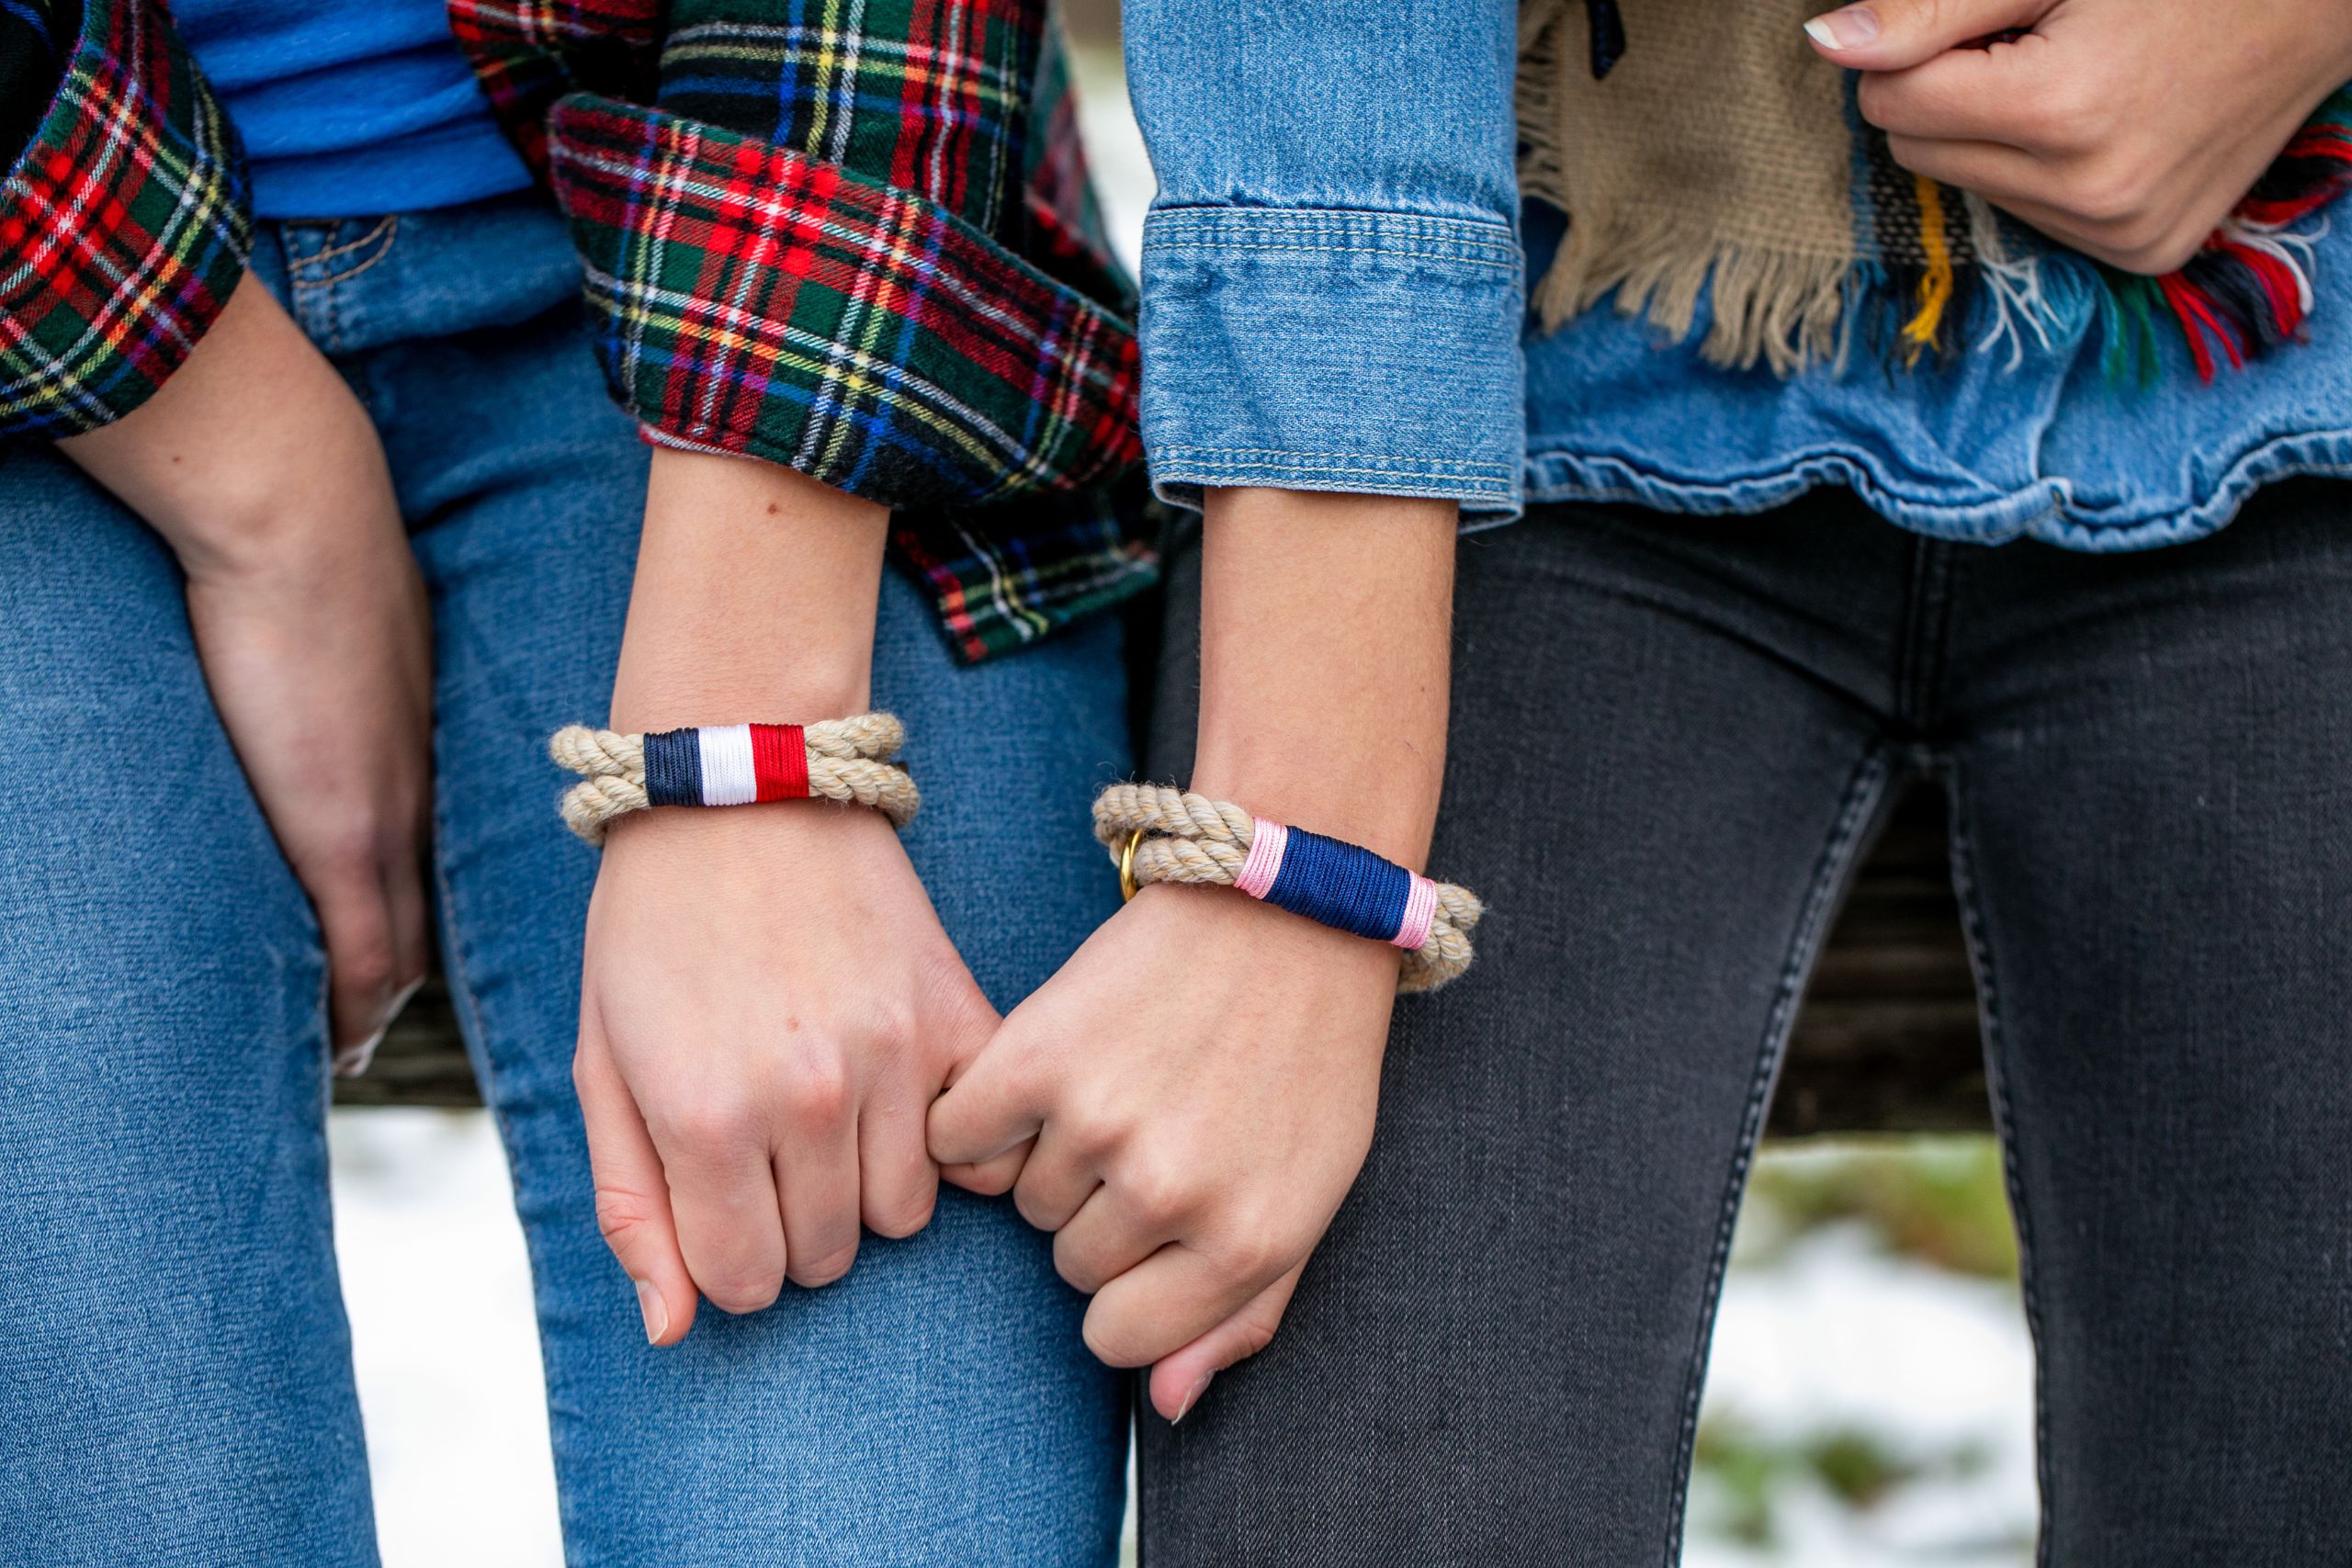 A photo of two young women wearing bracelets and holding pinkies